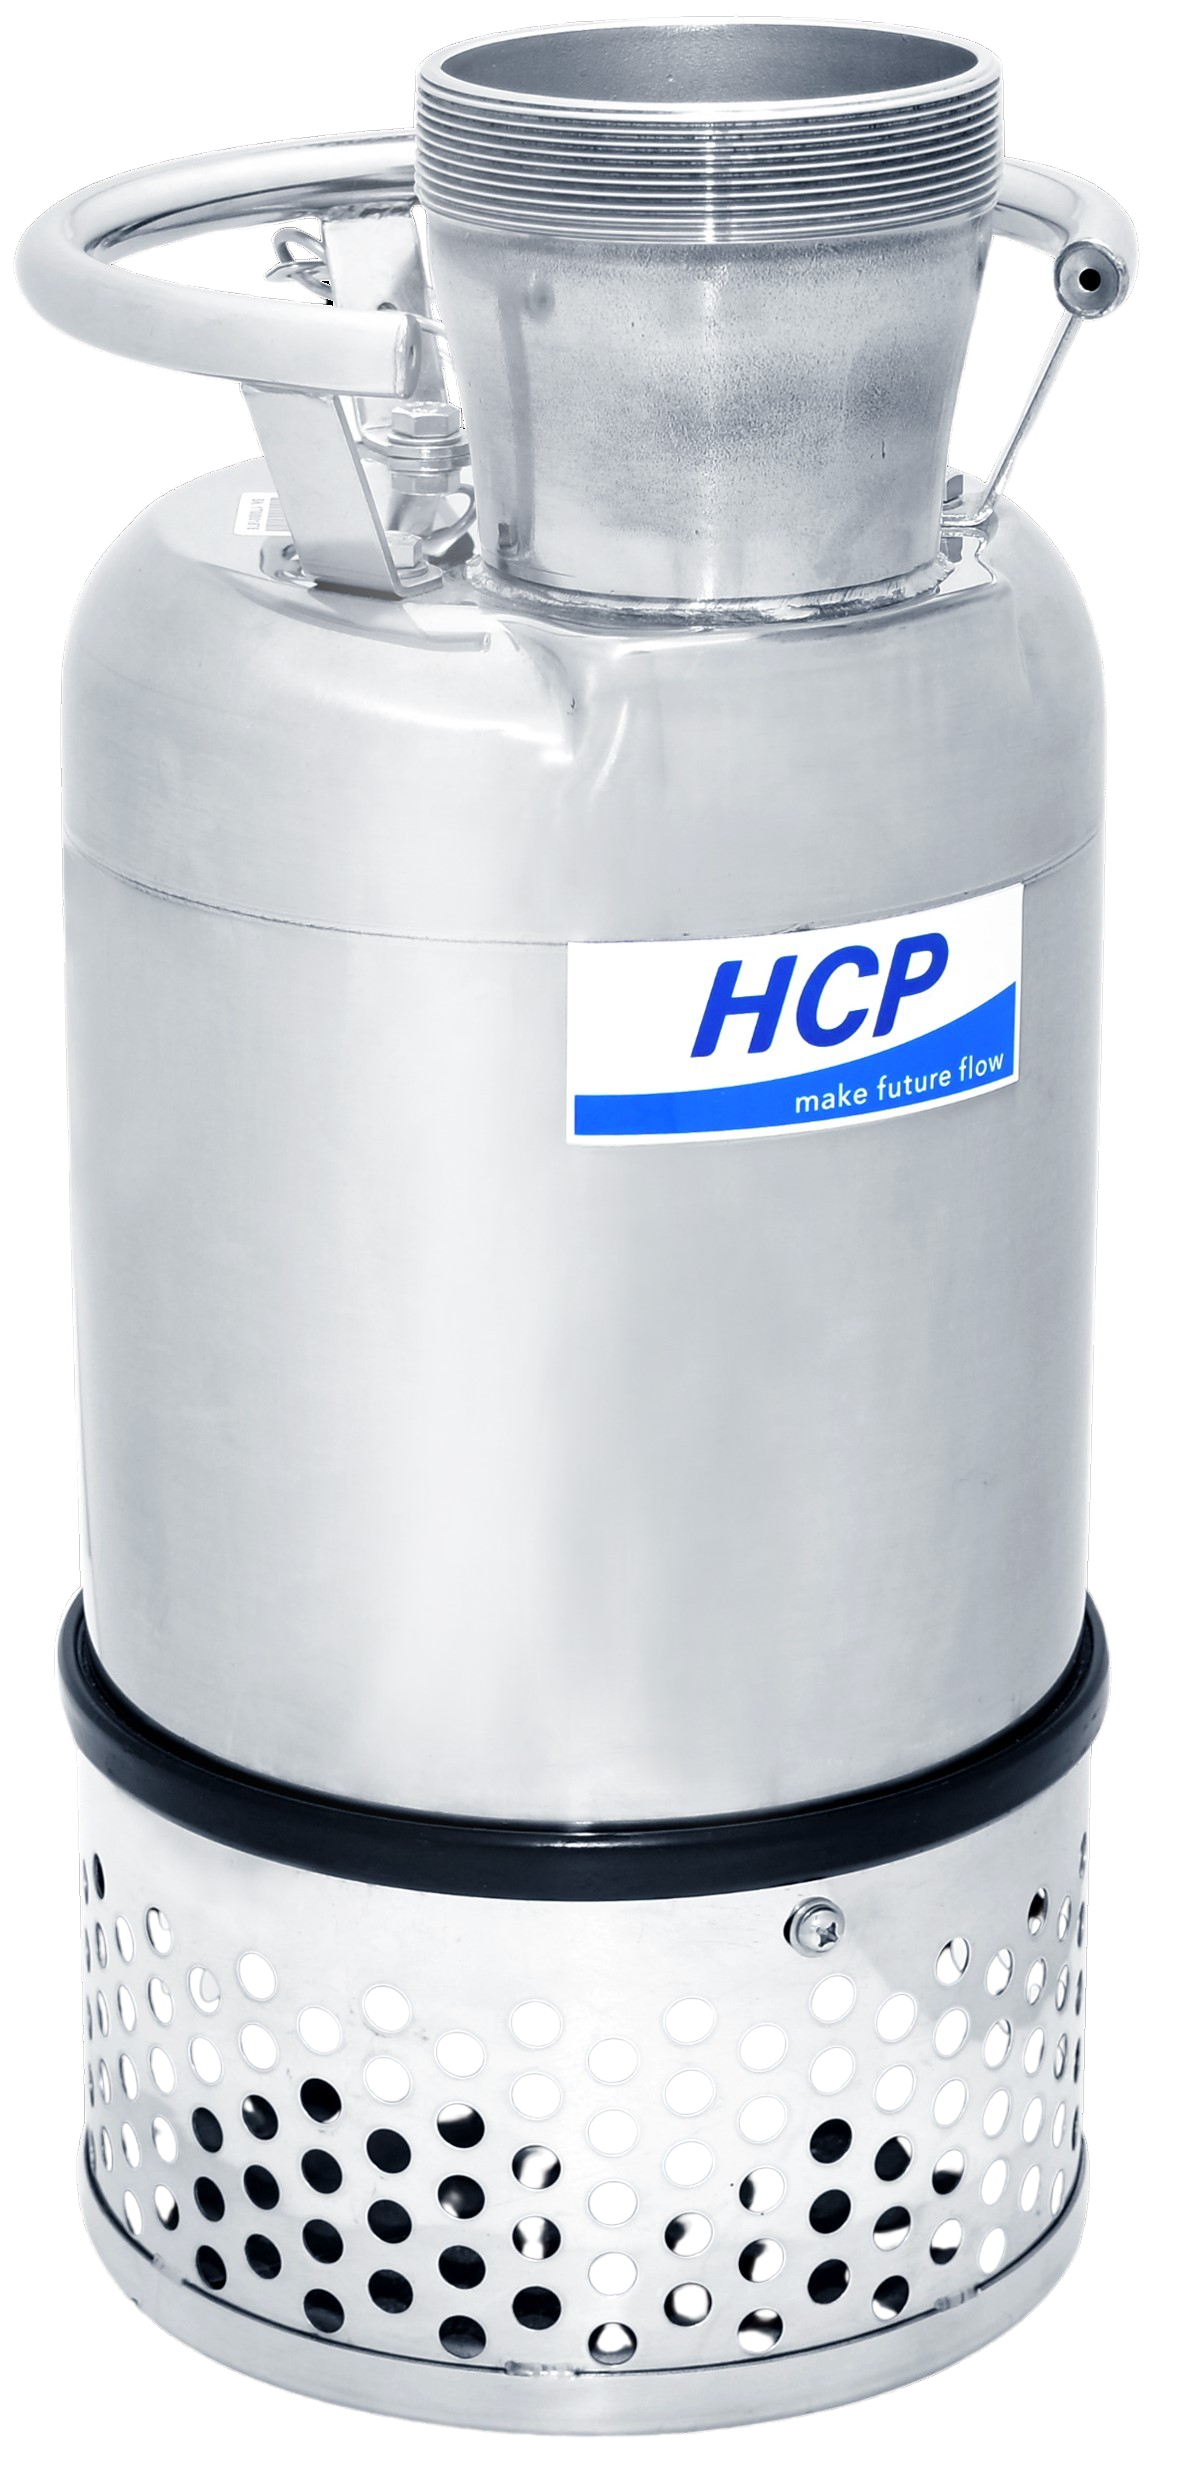 HCP Submersible Large Volume Dewatering Pump Model L-405A - 4" Discharge | 1/2 HP | 120V | 216 GPM